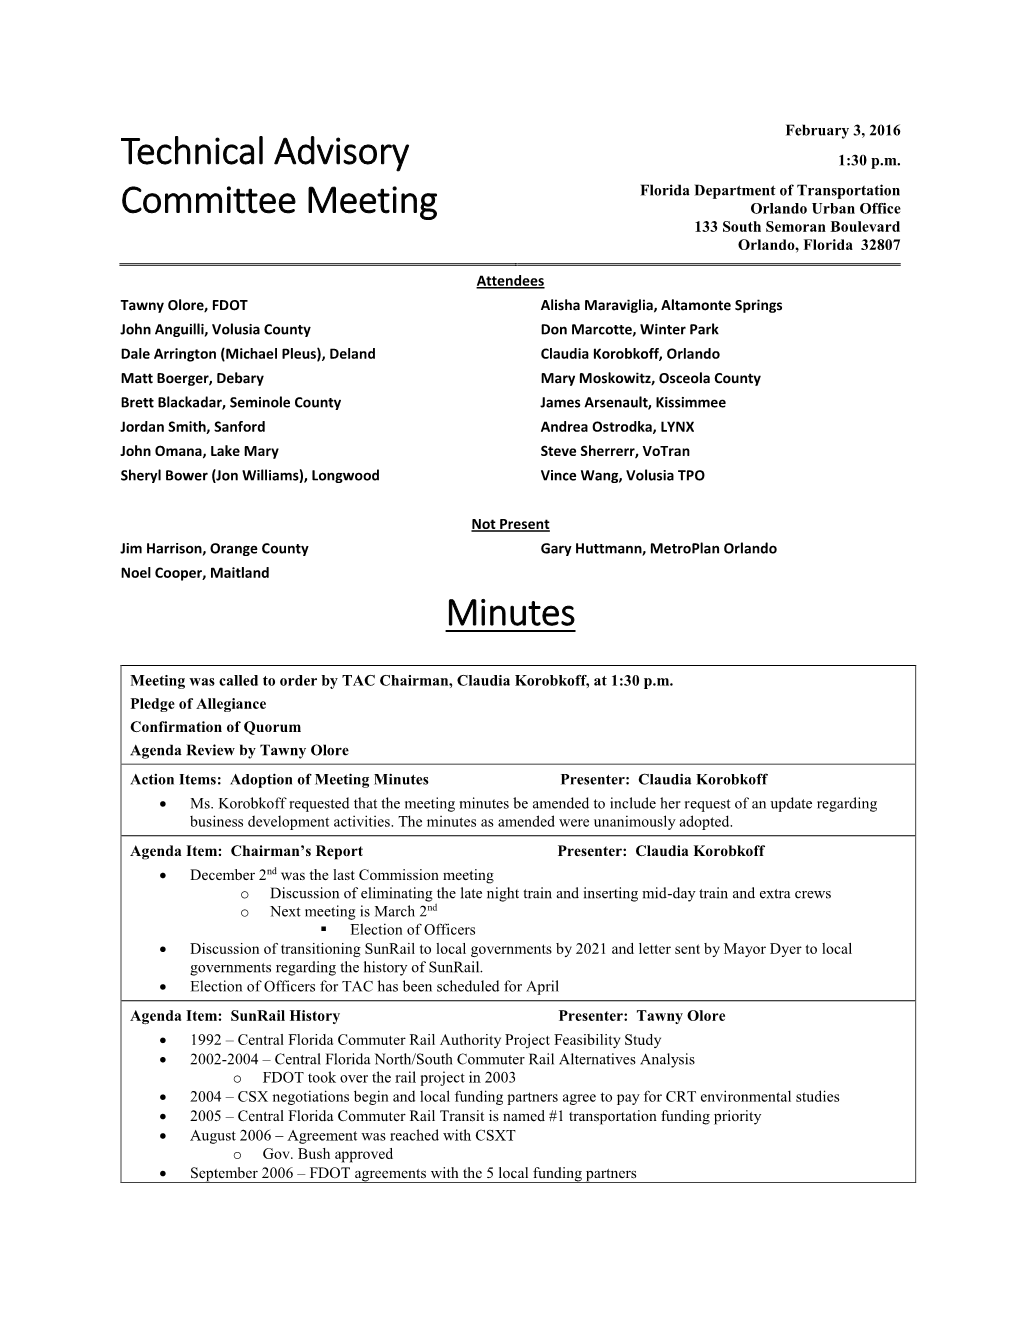 Technical Advisory Committee Meeting Minutes